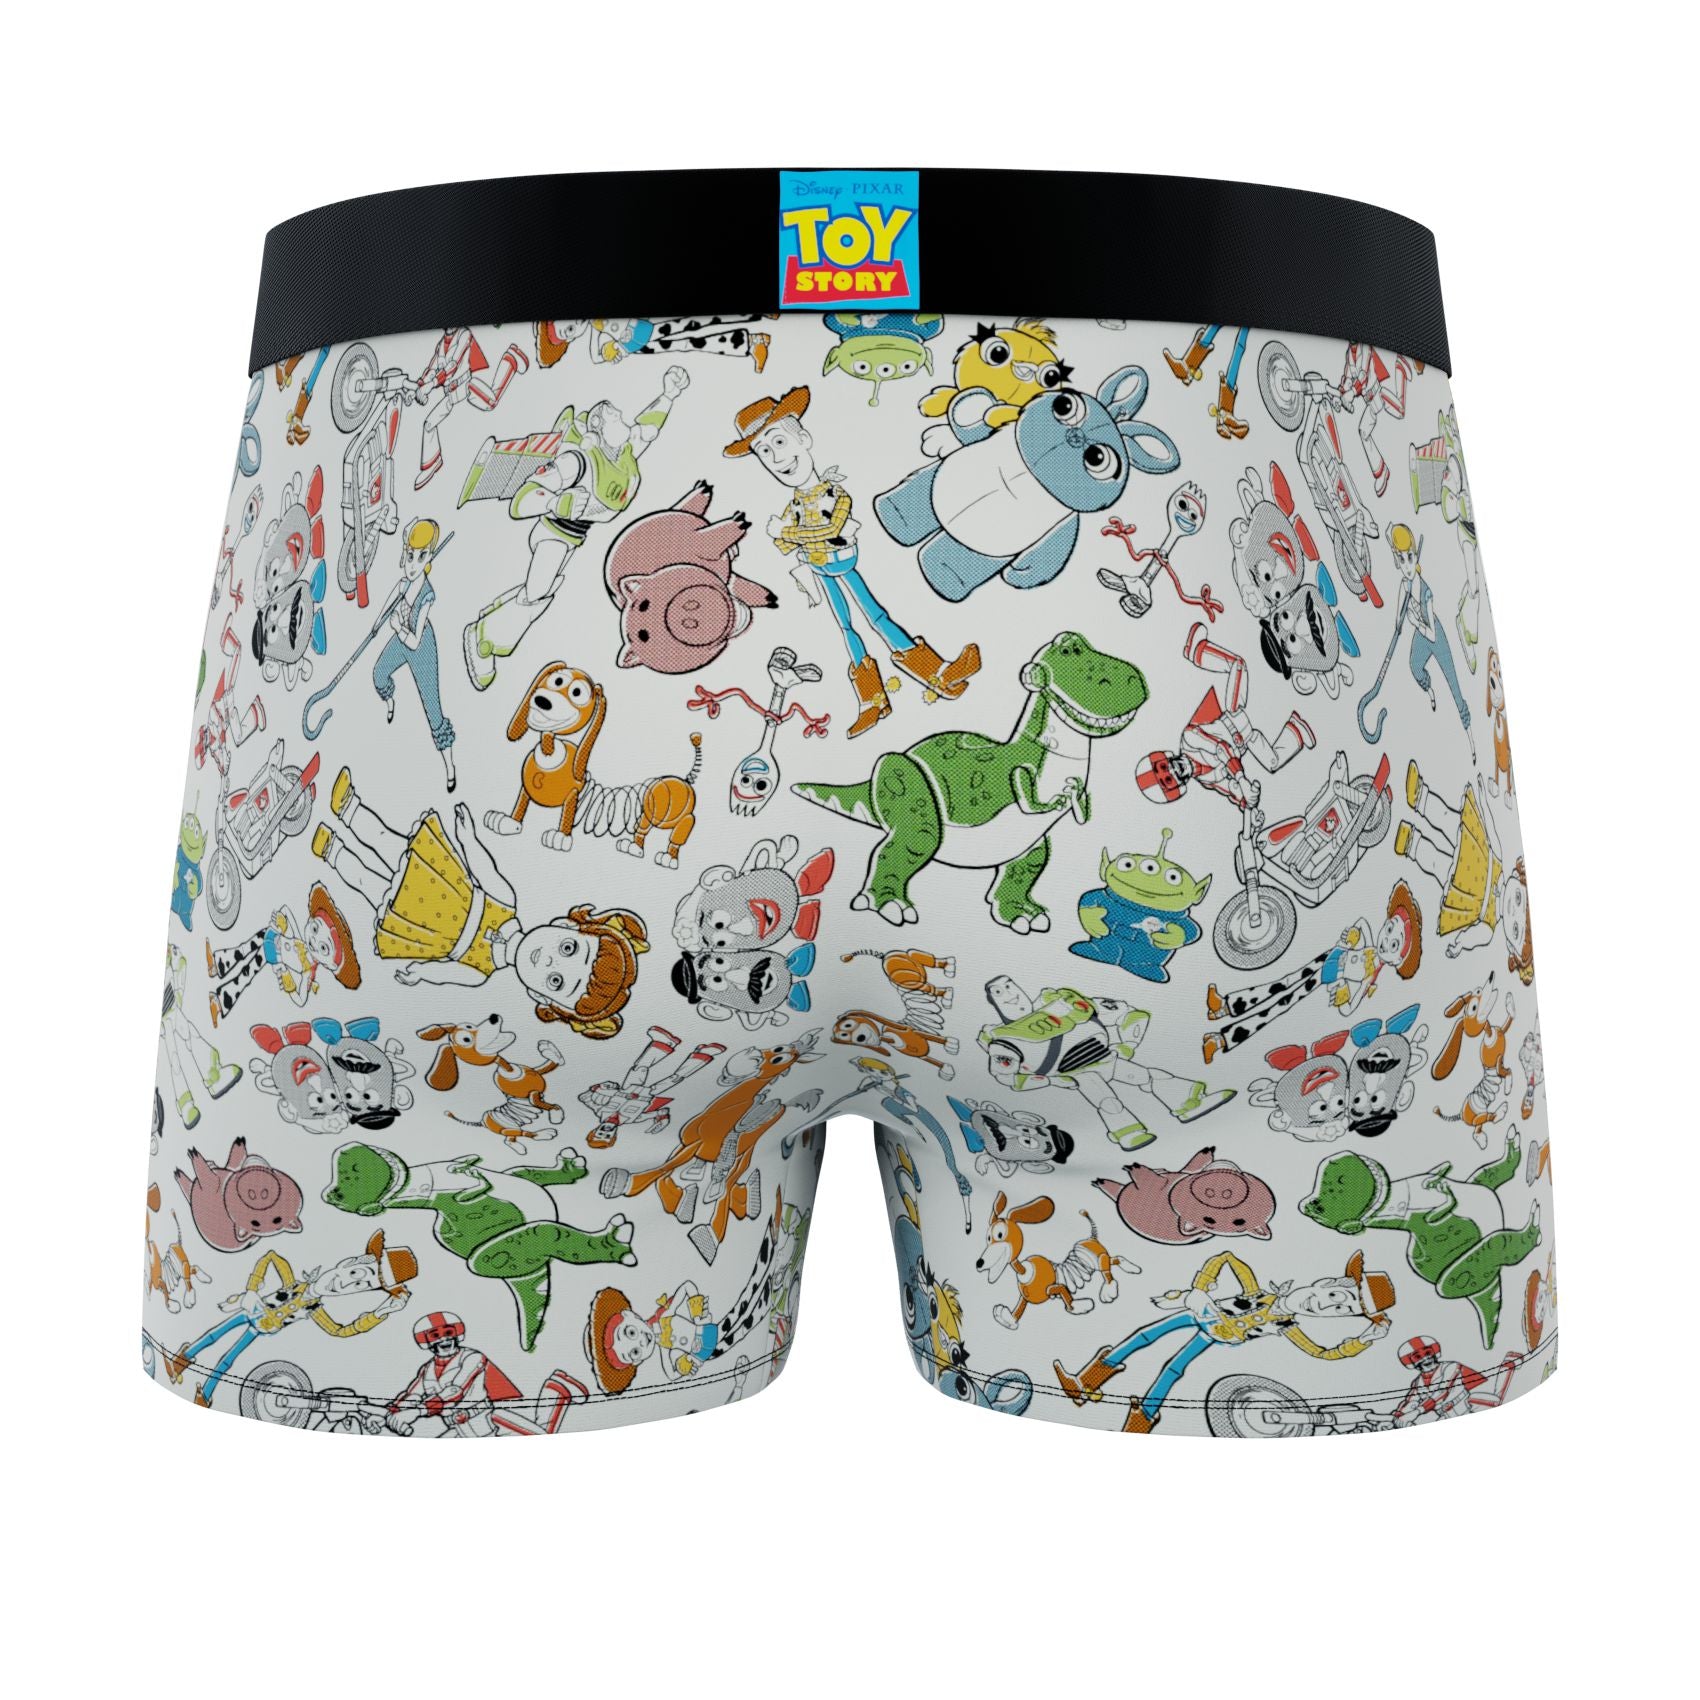 CRAZYBOXER Toy Story All Characters Men's Boxer Briefs (2 pack)